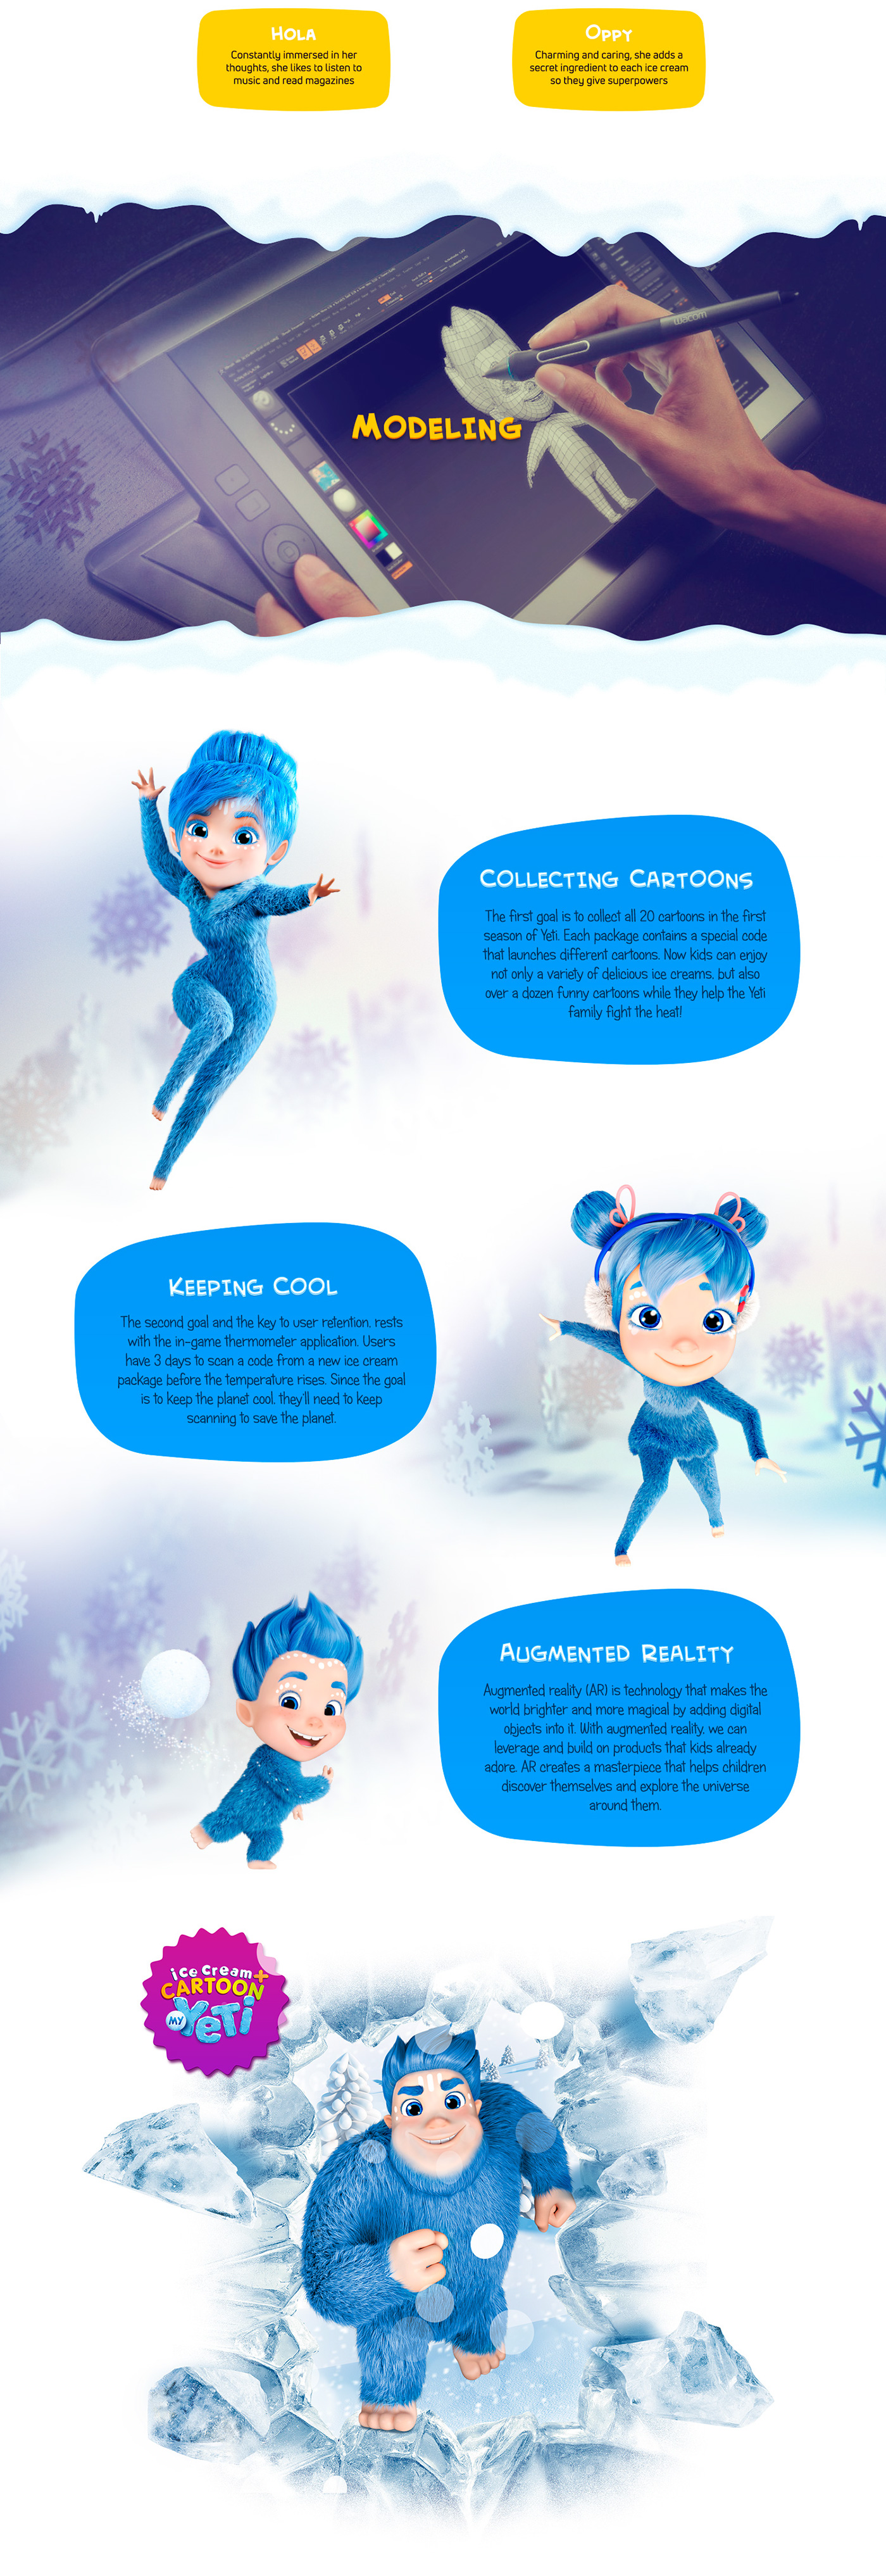 augmented reality AR ice cream yeti application Mixed Reality kids app snow people Live animations marketing campaign